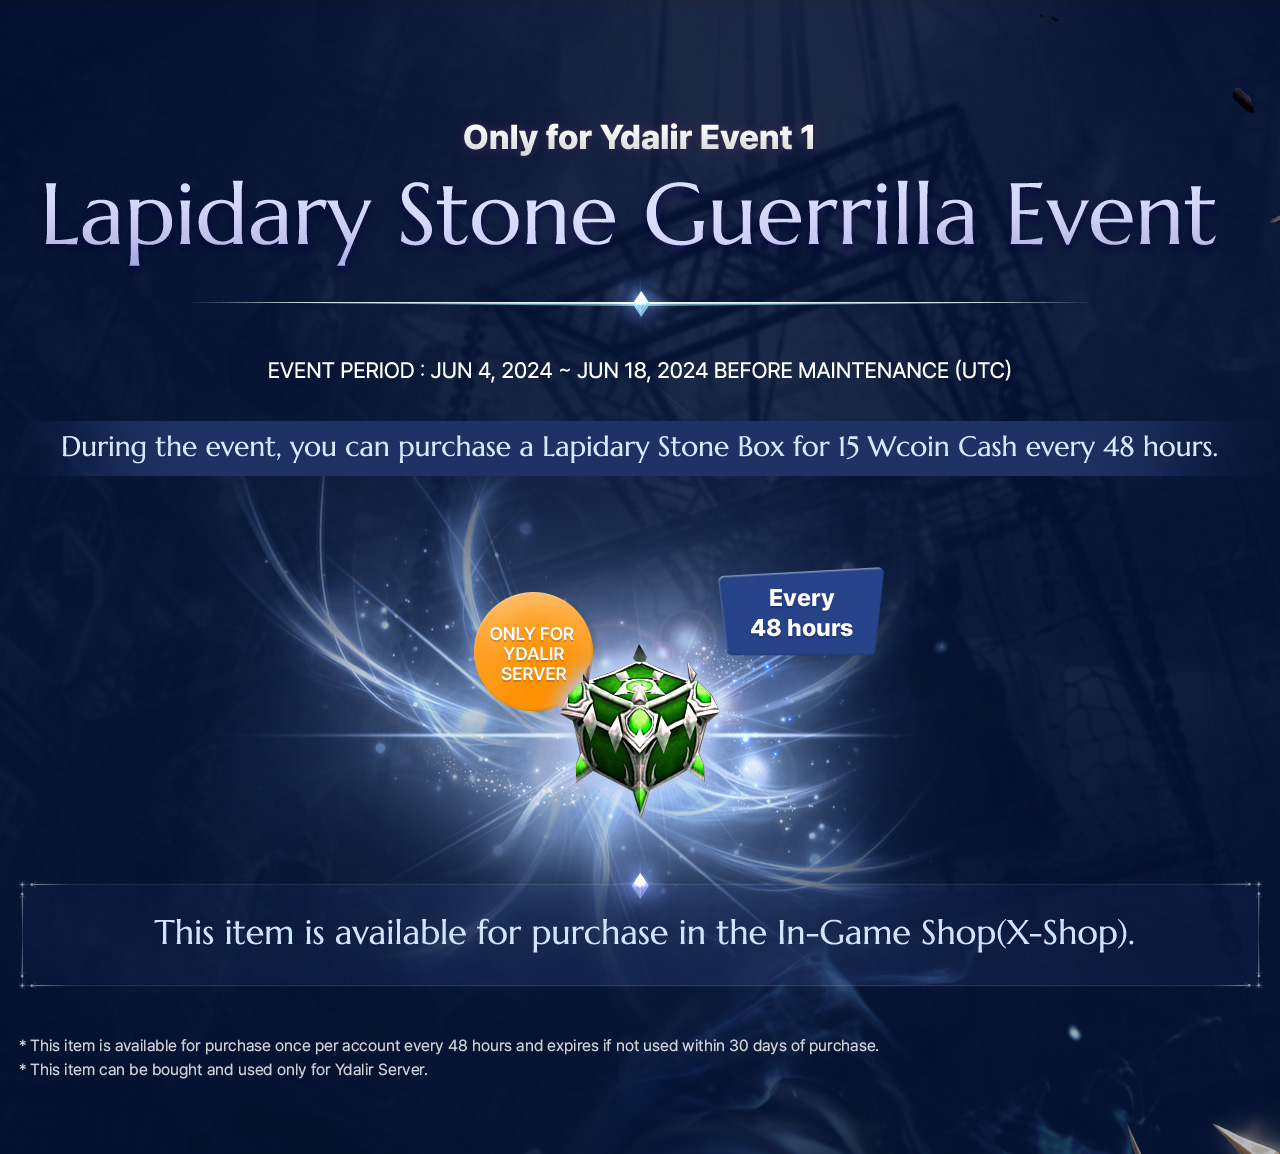 Only for Ydalir Event 1 Lapidary Stone Guerrilla Event